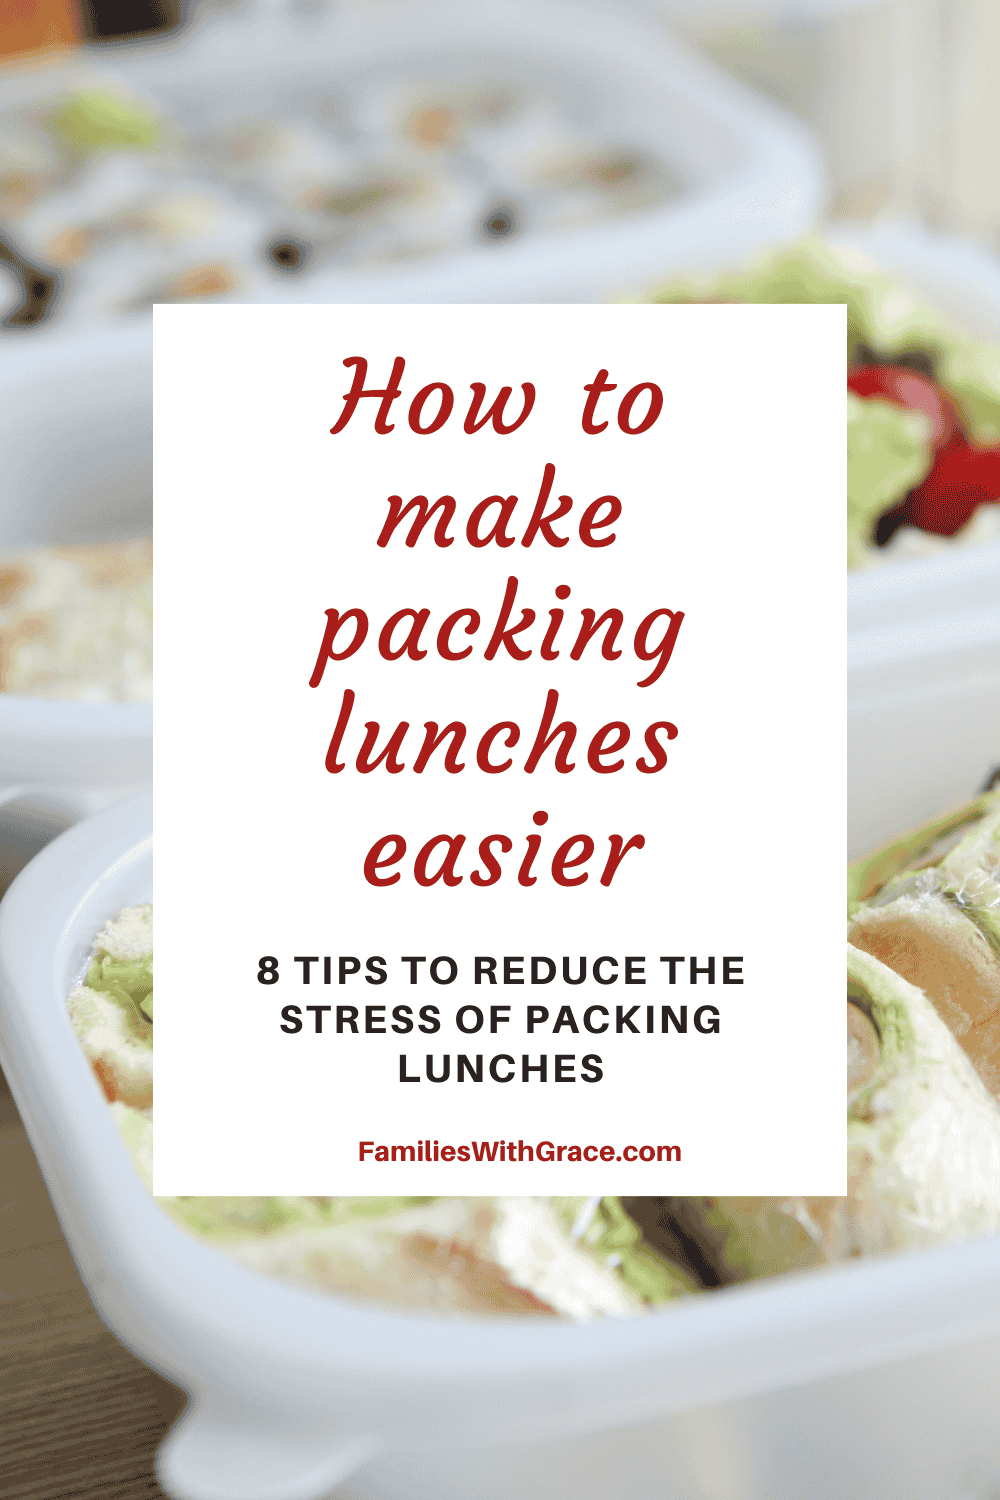 How to make packing lunches easier